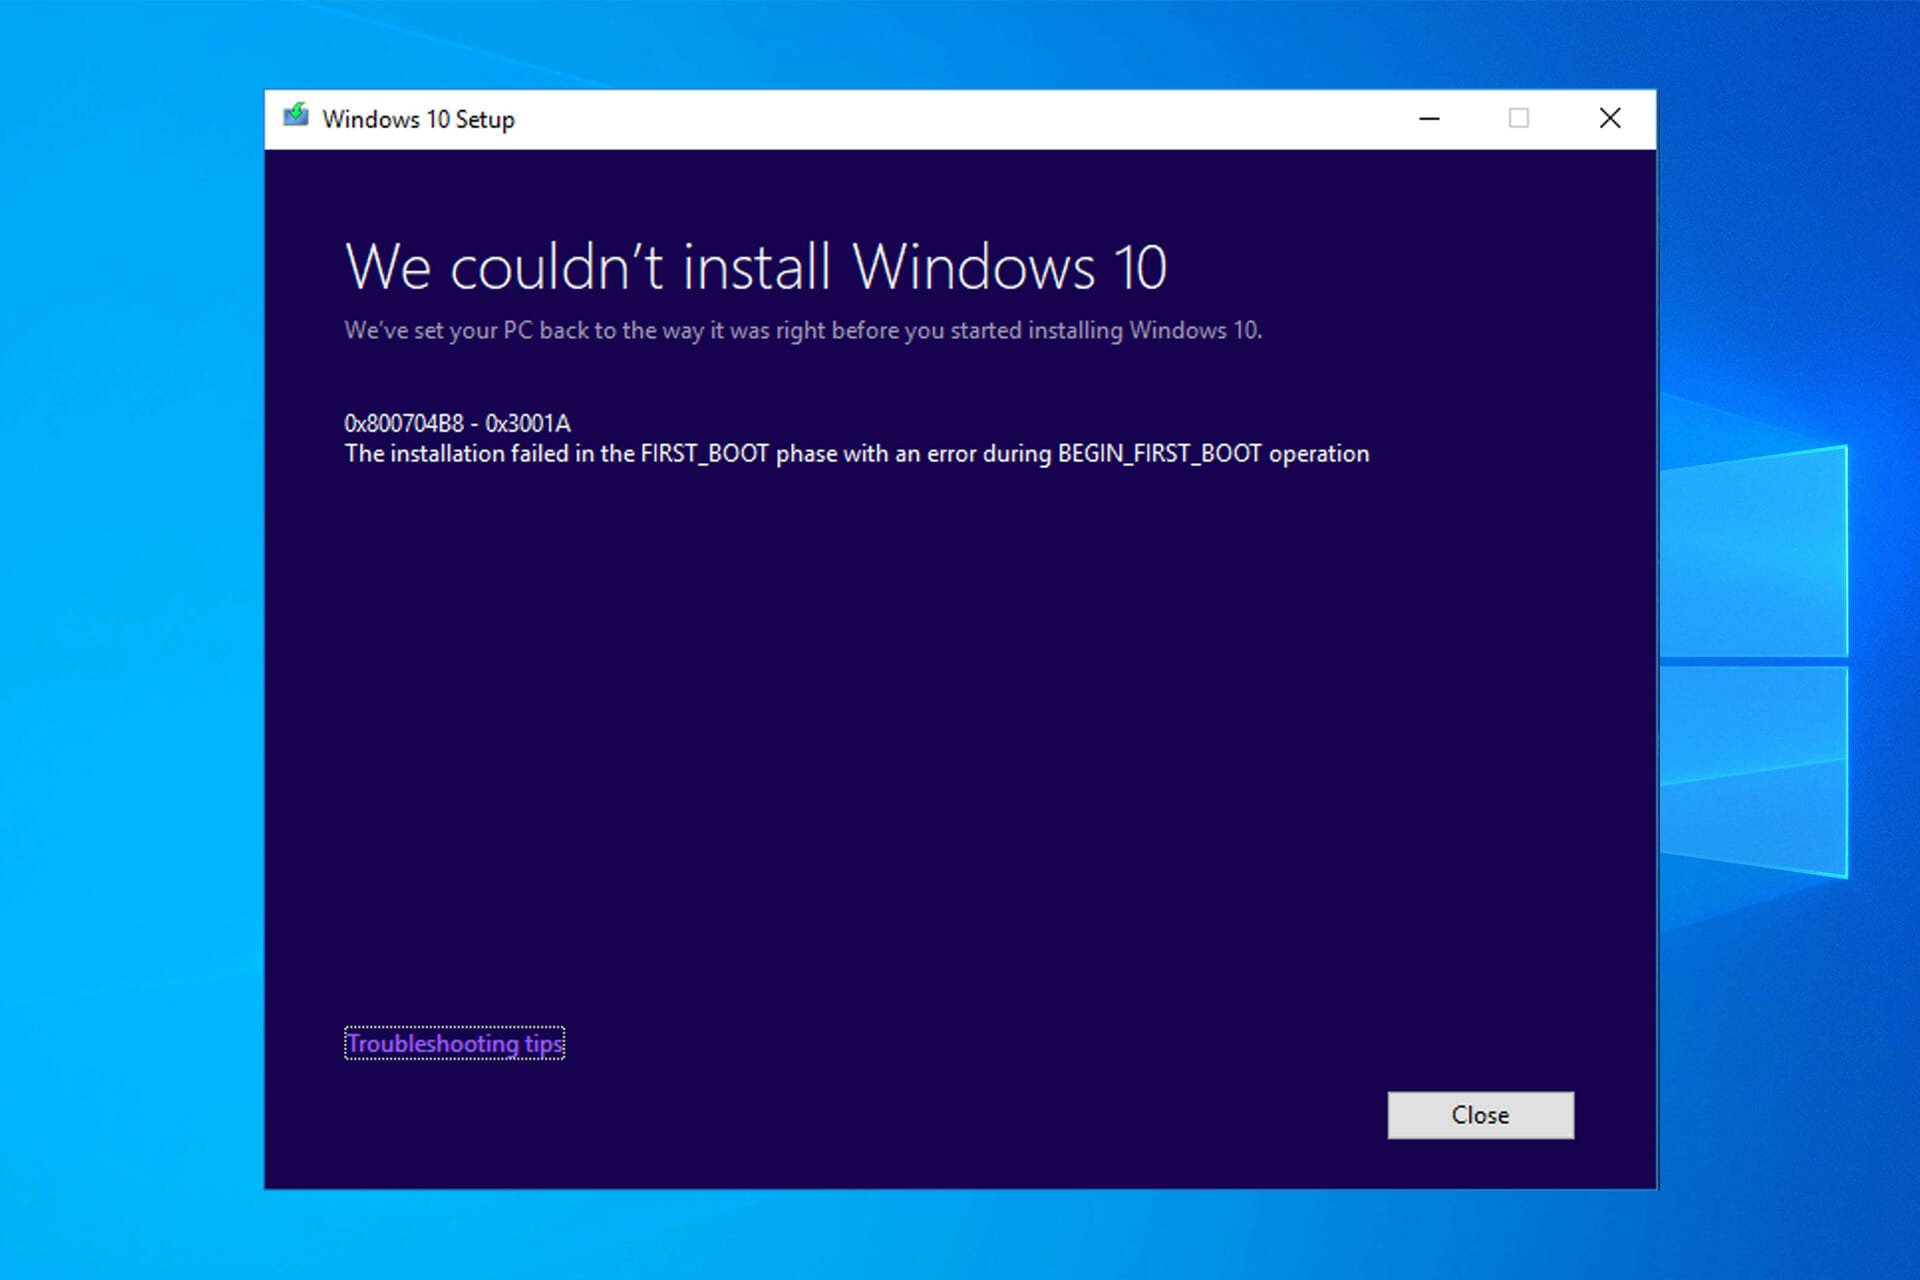 Can’t install Windows 10